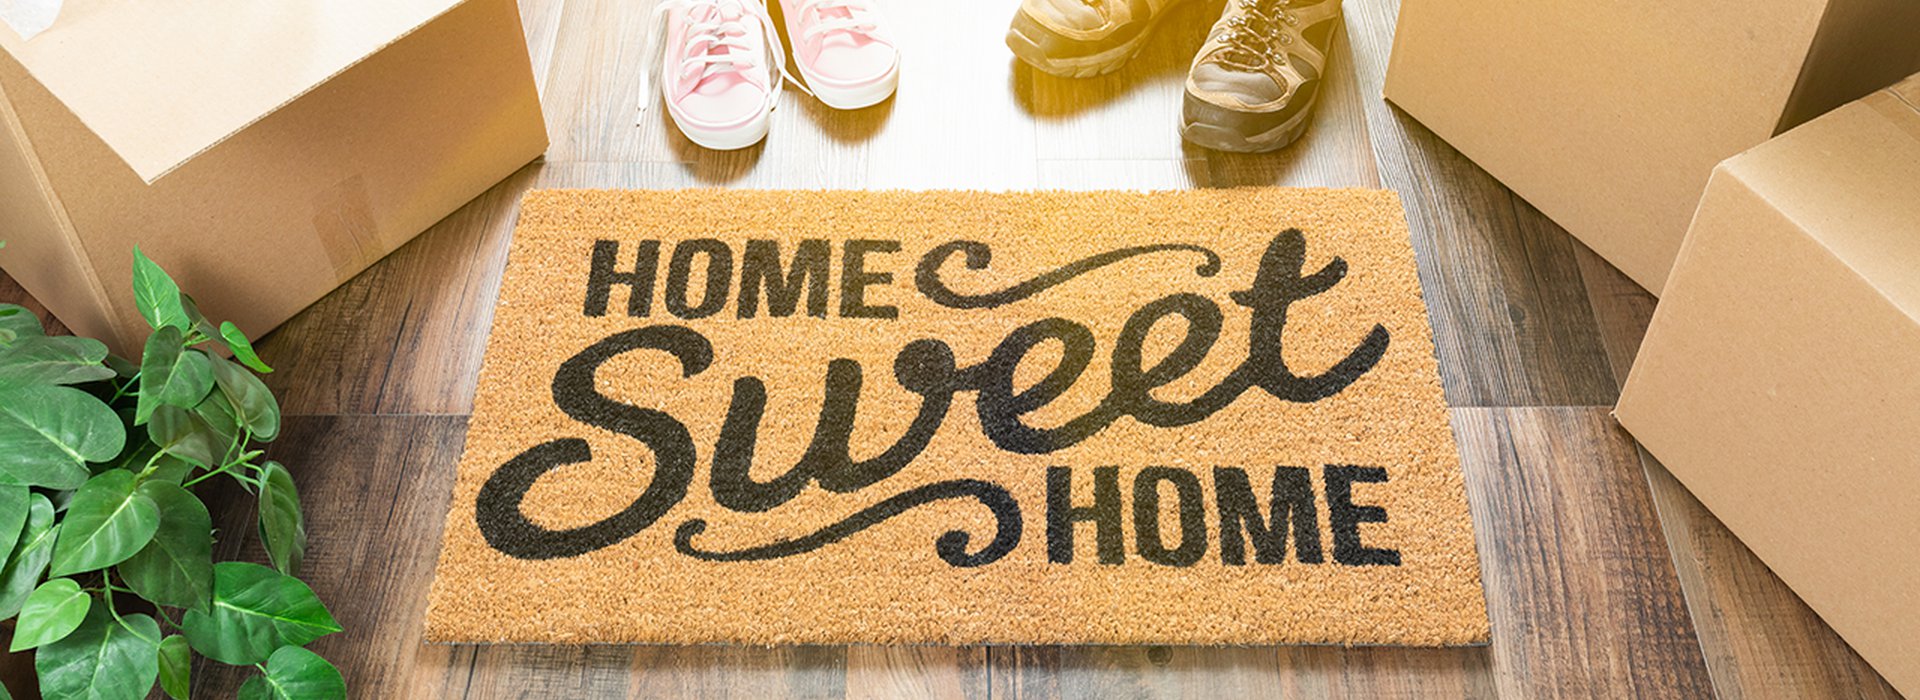 Home Sweet Home Welcome Mat, Moving Boxes, Women and Male Shoes and Plant on Hard Wood Floors.